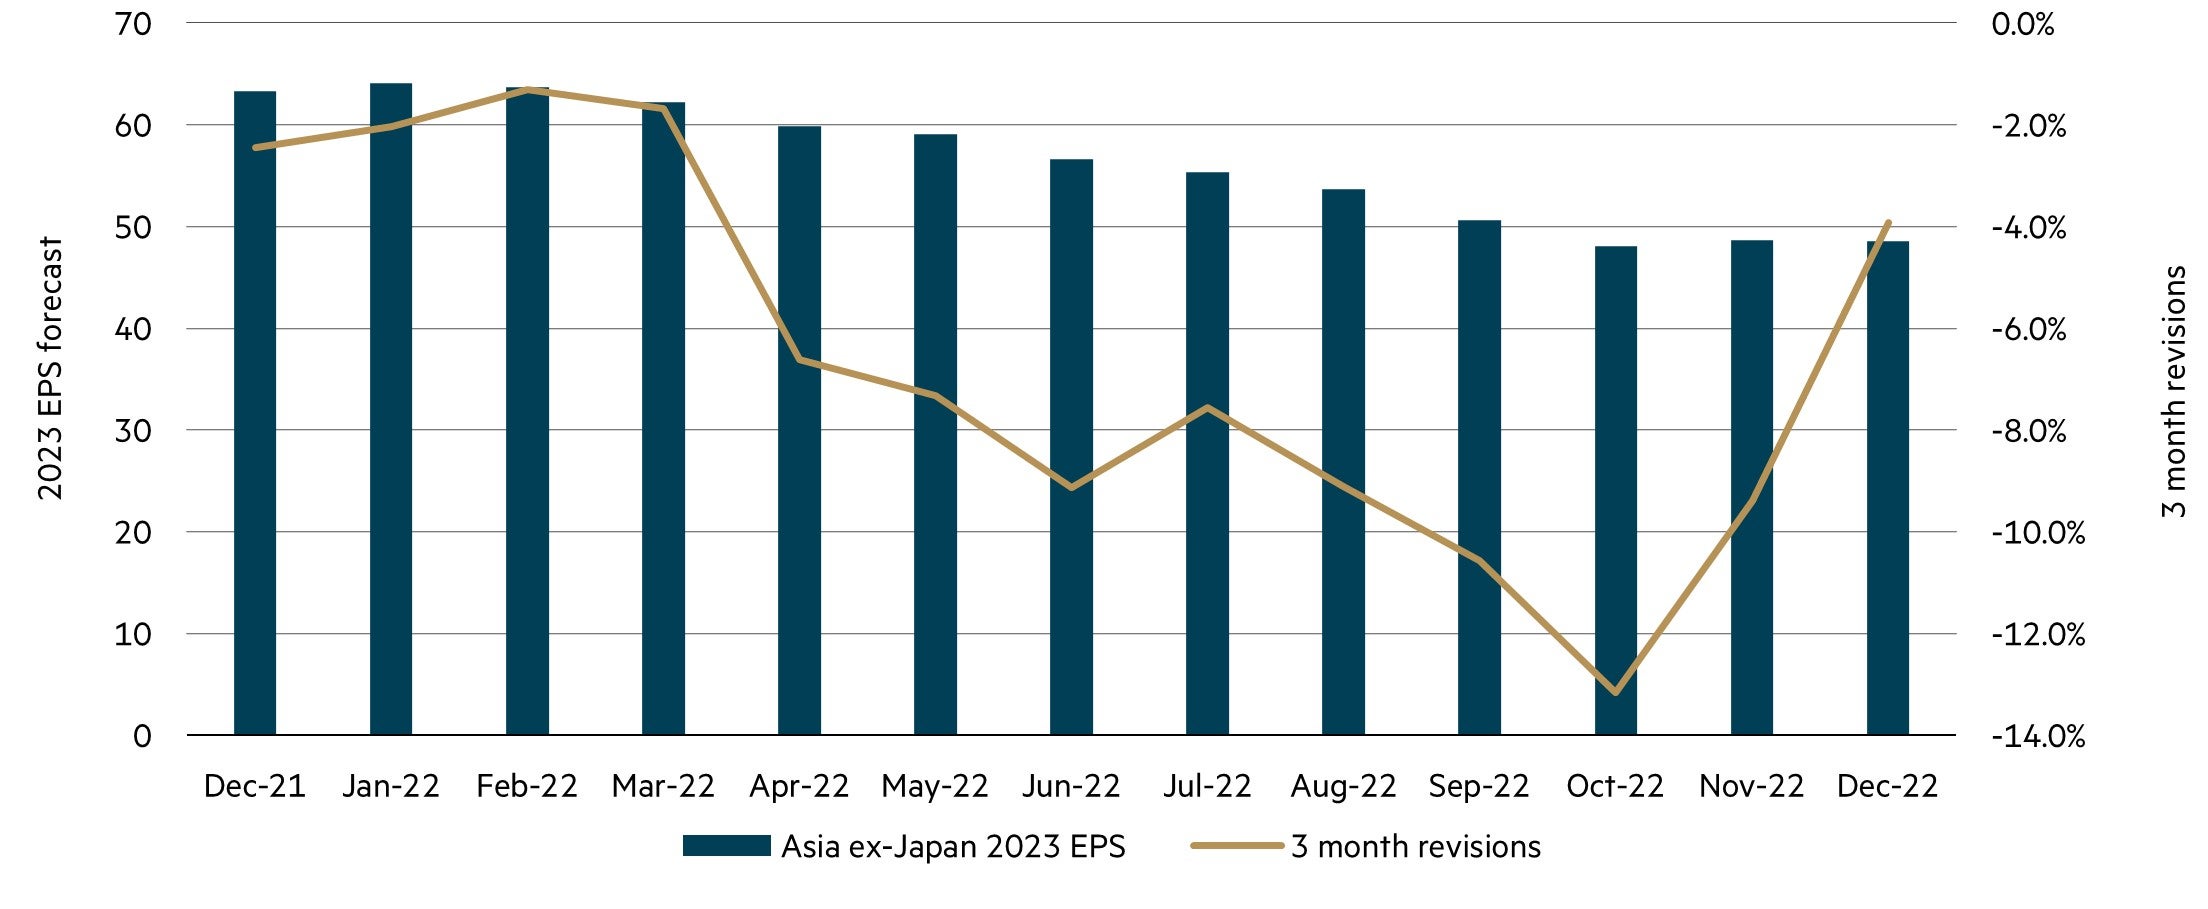 Asia ex-Japan 2023 EPS – bottoming out